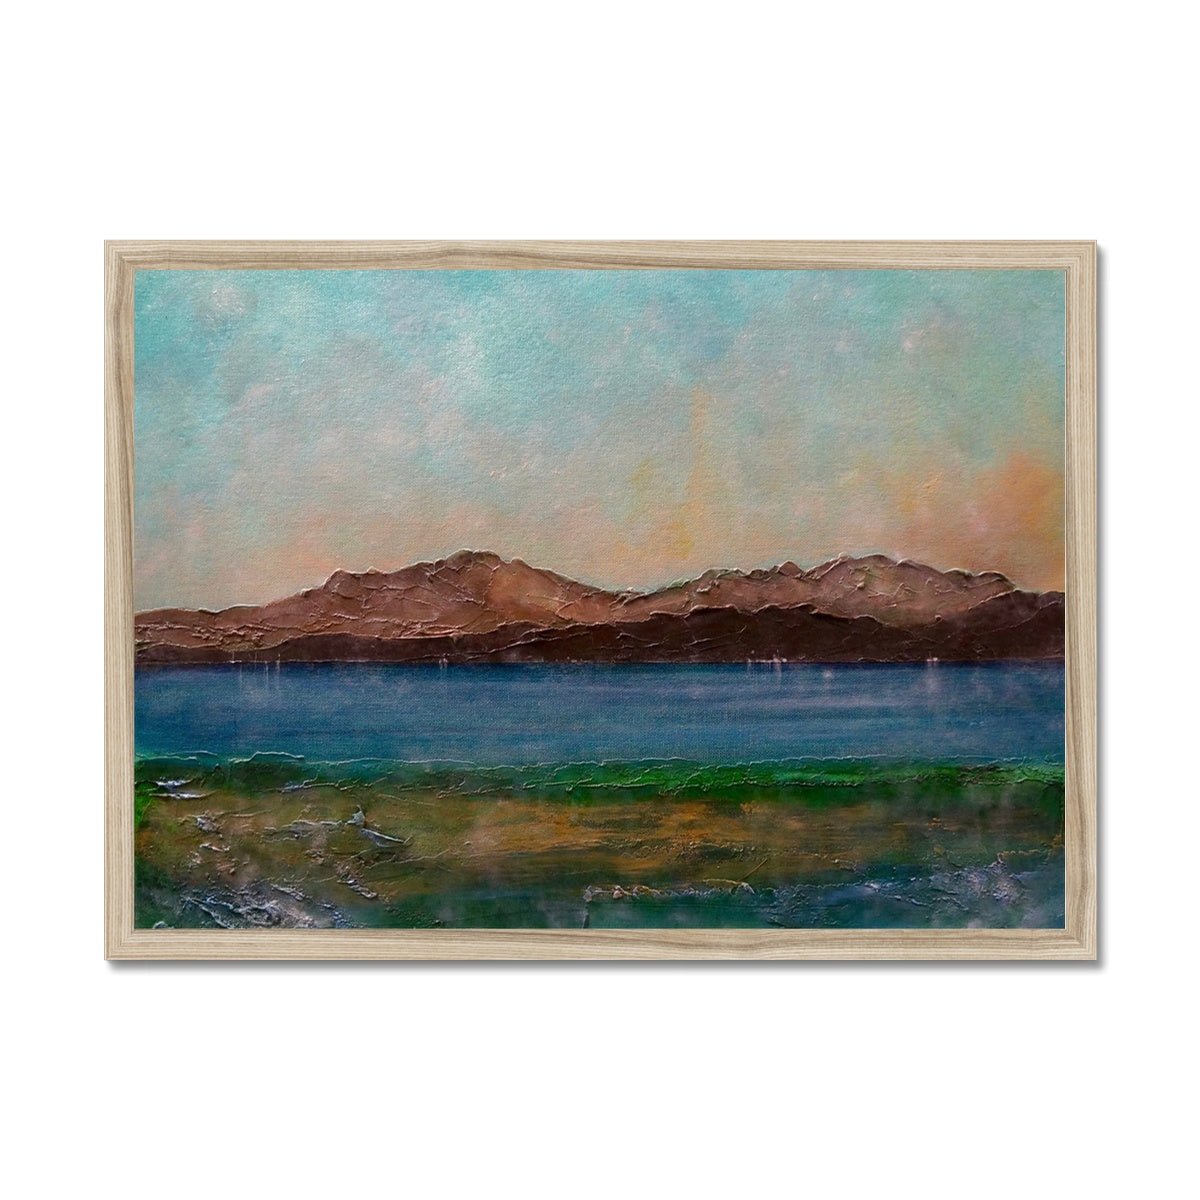 Arran From Scalpsie Bay Painting | Framed Prints From Scotland-Framed Prints-Arran Art Gallery-A2 Landscape-Natural Frame-Paintings, Prints, Homeware, Art Gifts From Scotland By Scottish Artist Kevin Hunter